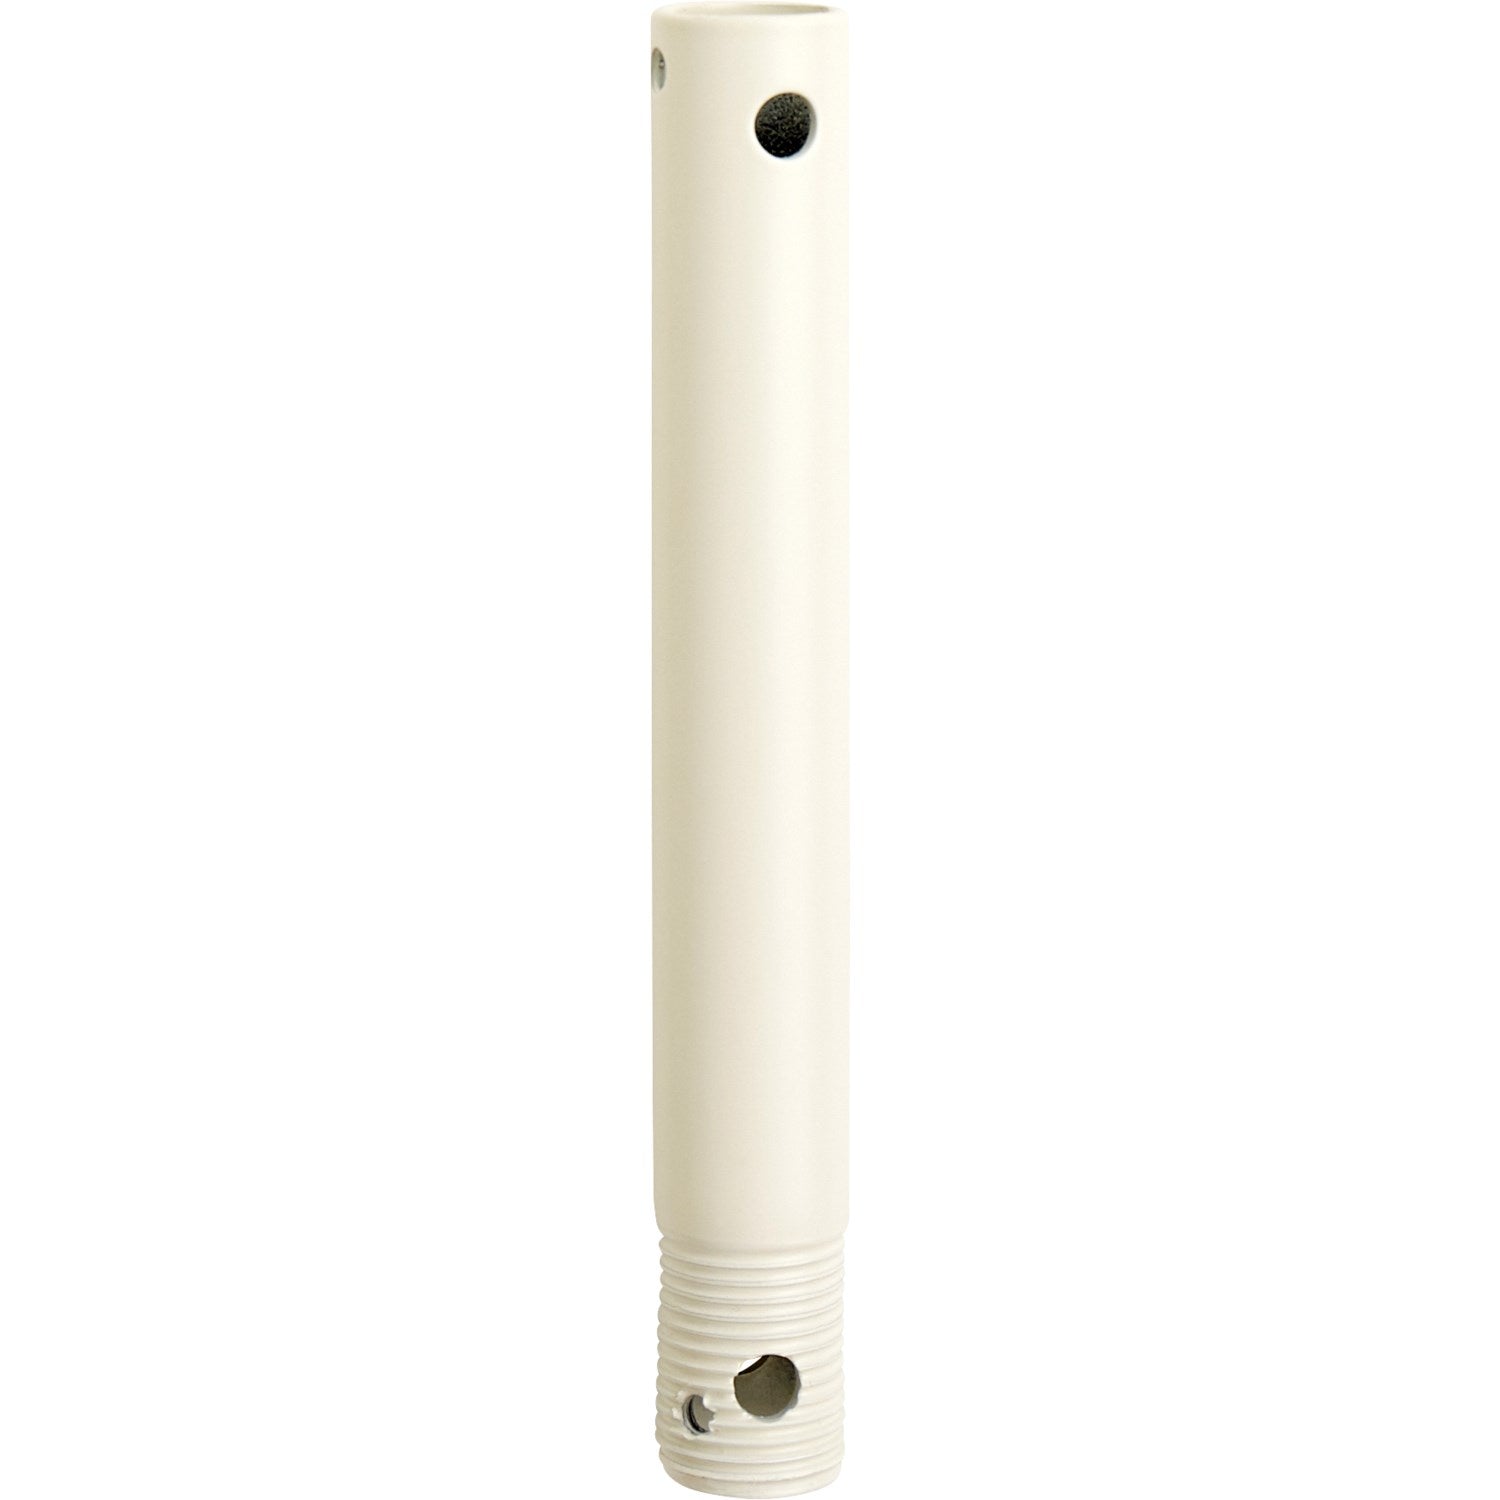 Quorum - 6-0667 - Downrod - 6 in. Downrods - Antique White